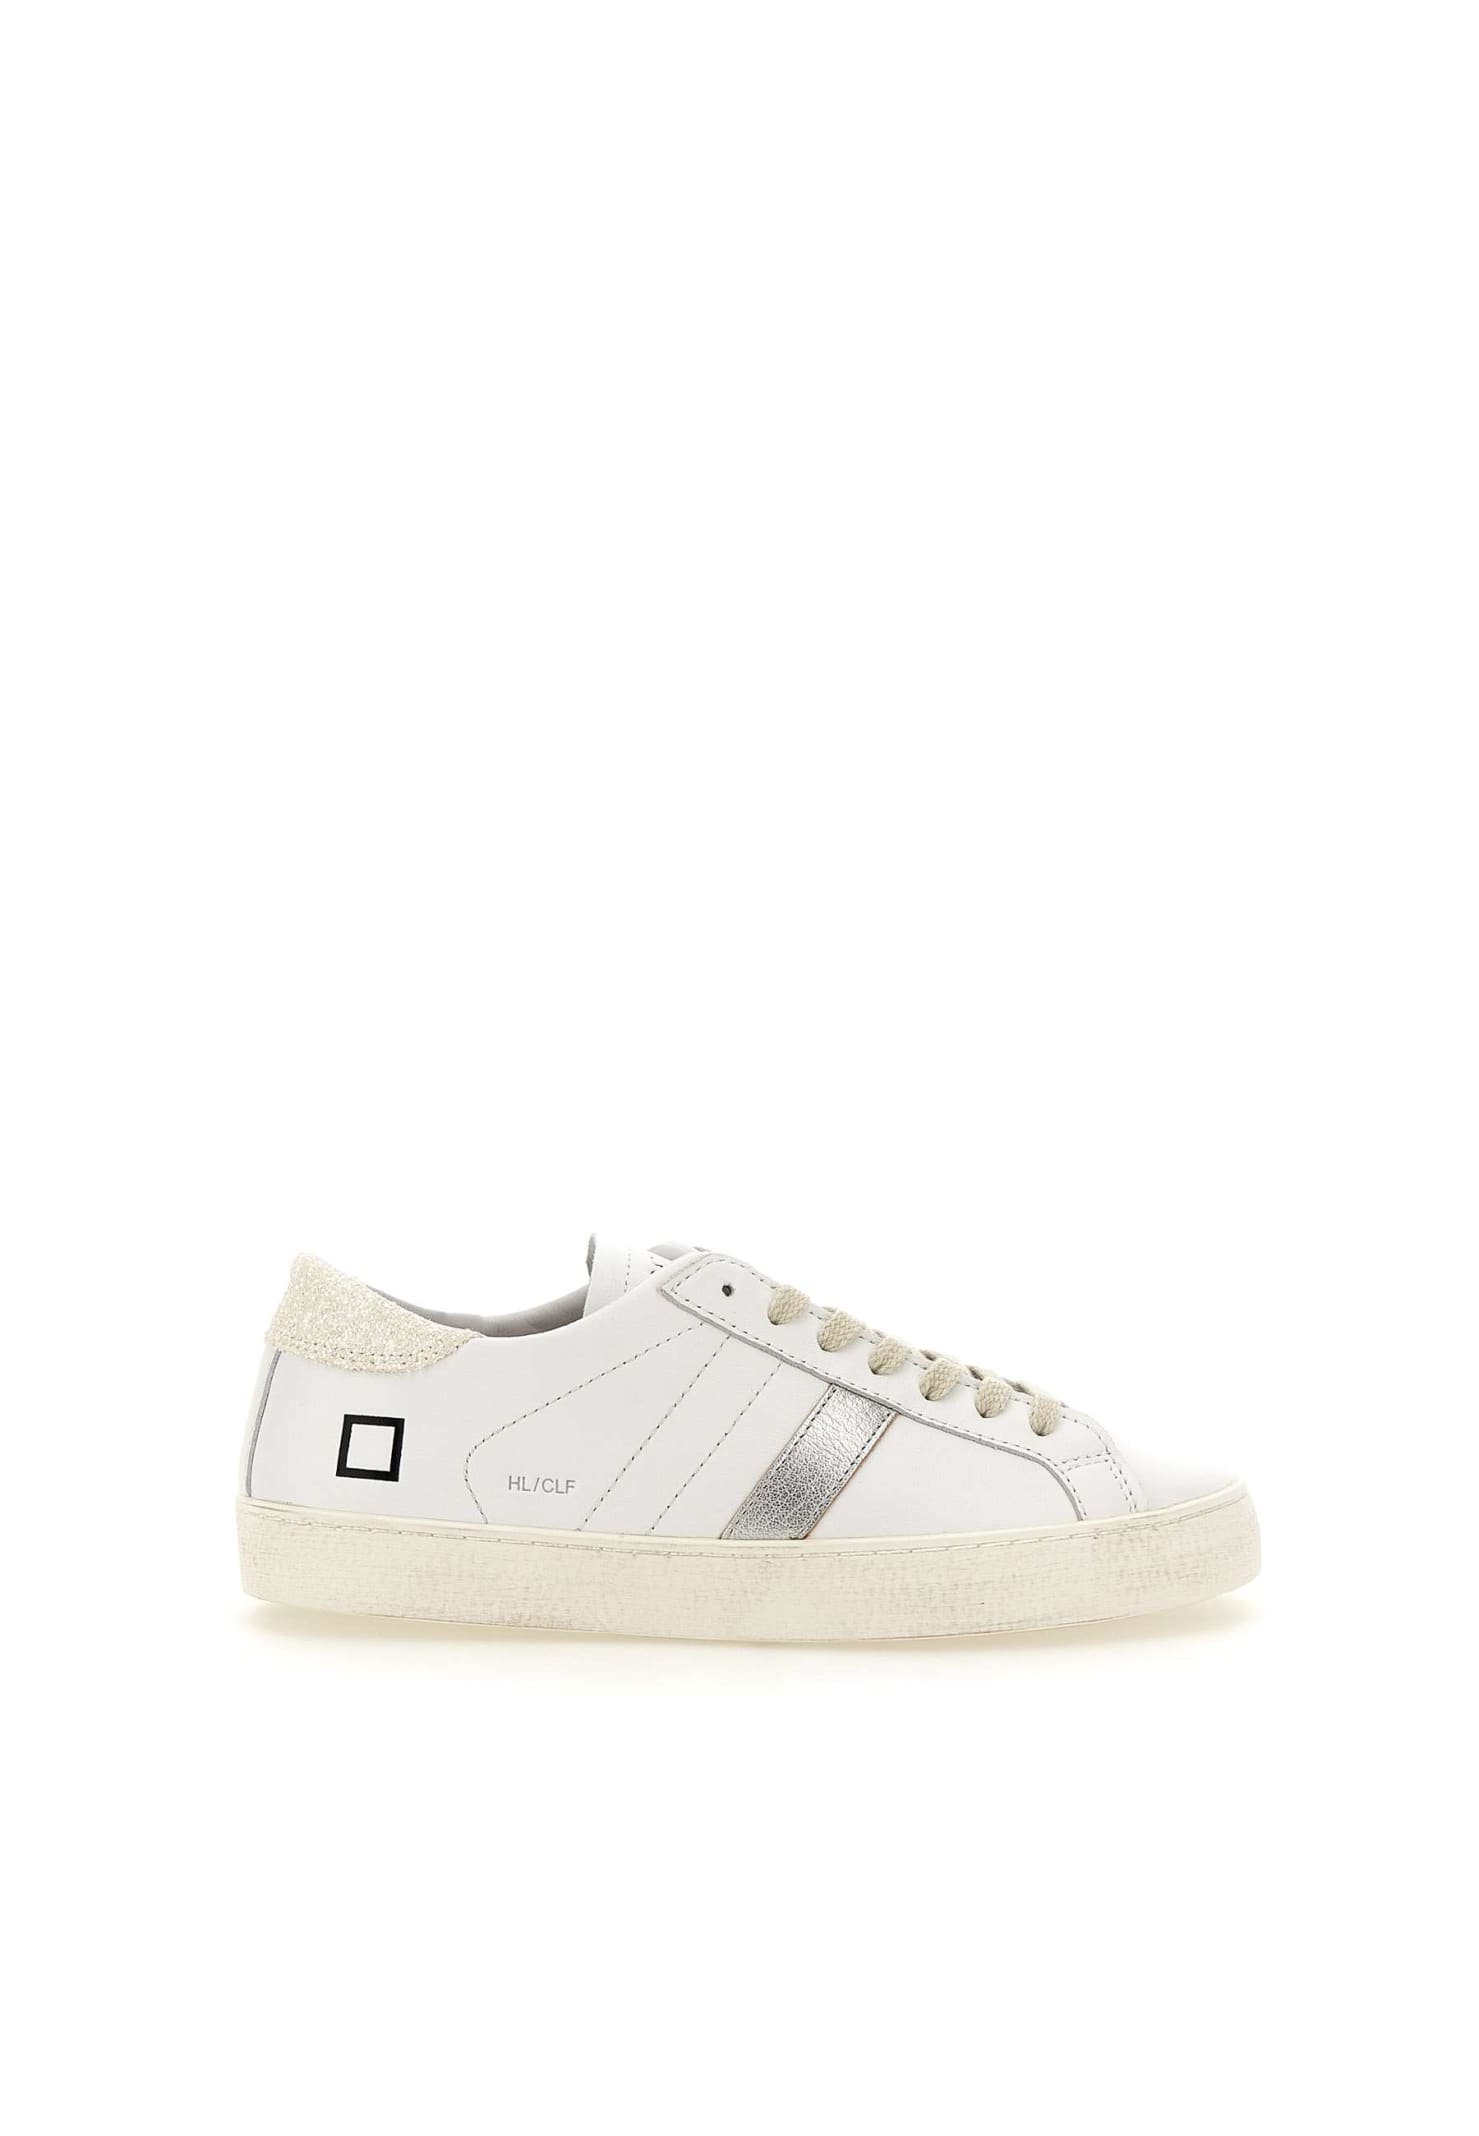 D.A.T.E. hillow Calf Leather Sneakers